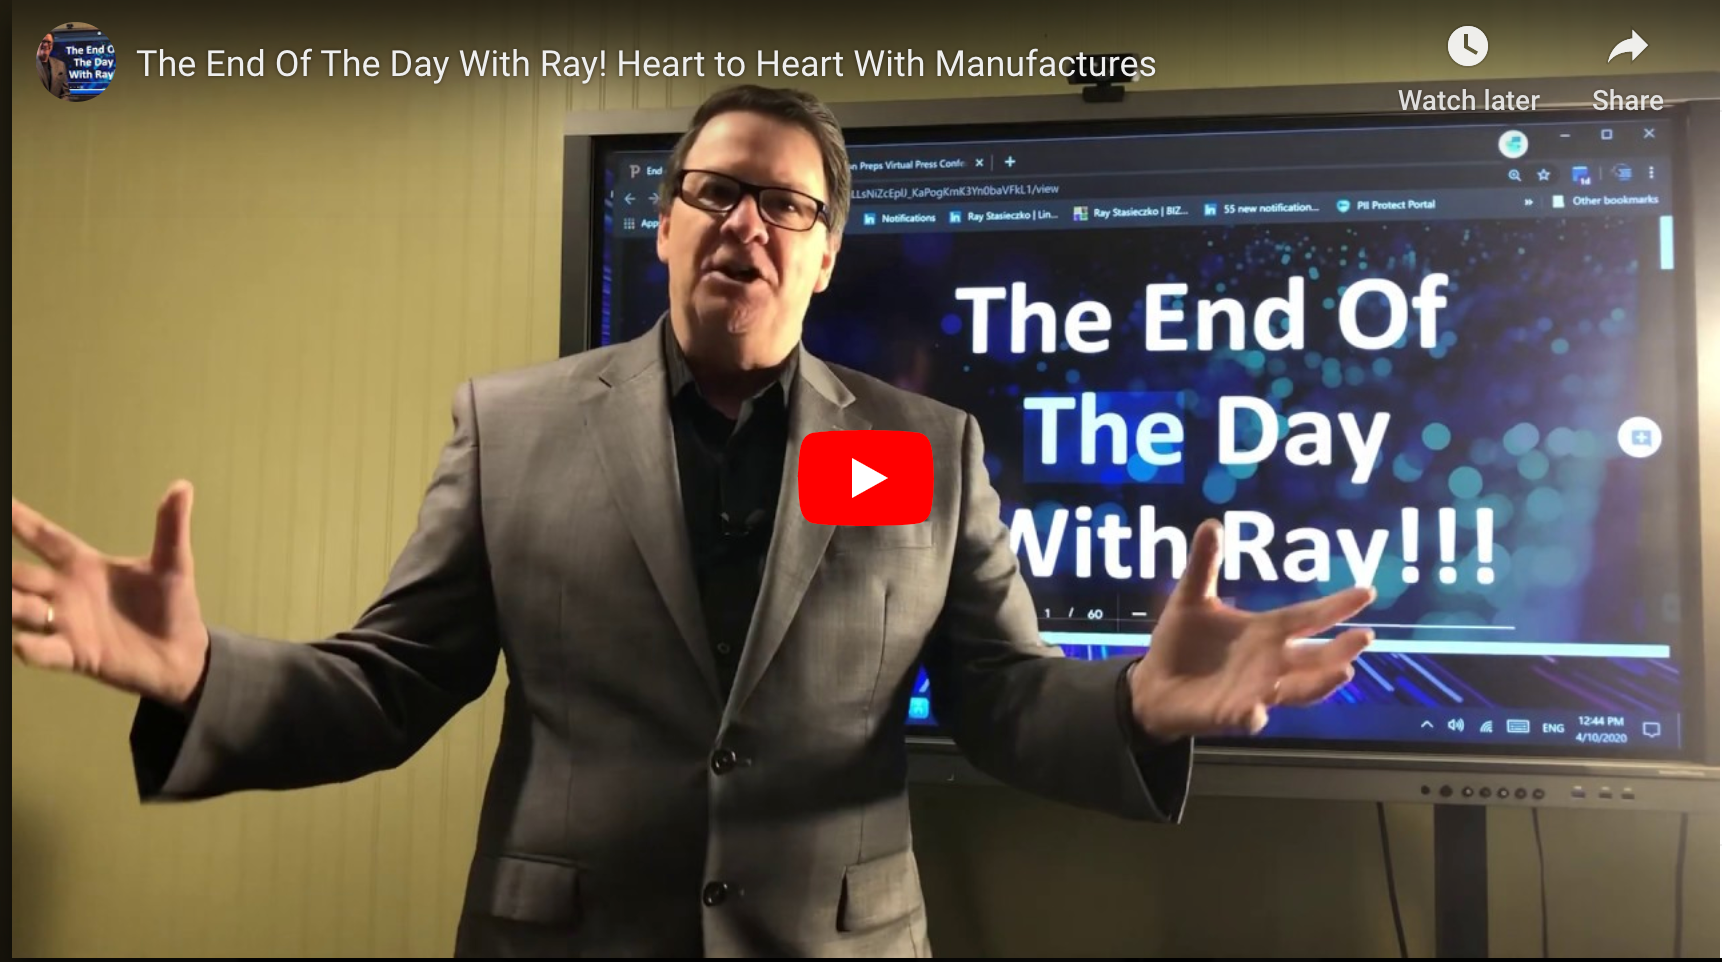 The End Of The Day With Ray! Heart to Heart With Manufactures